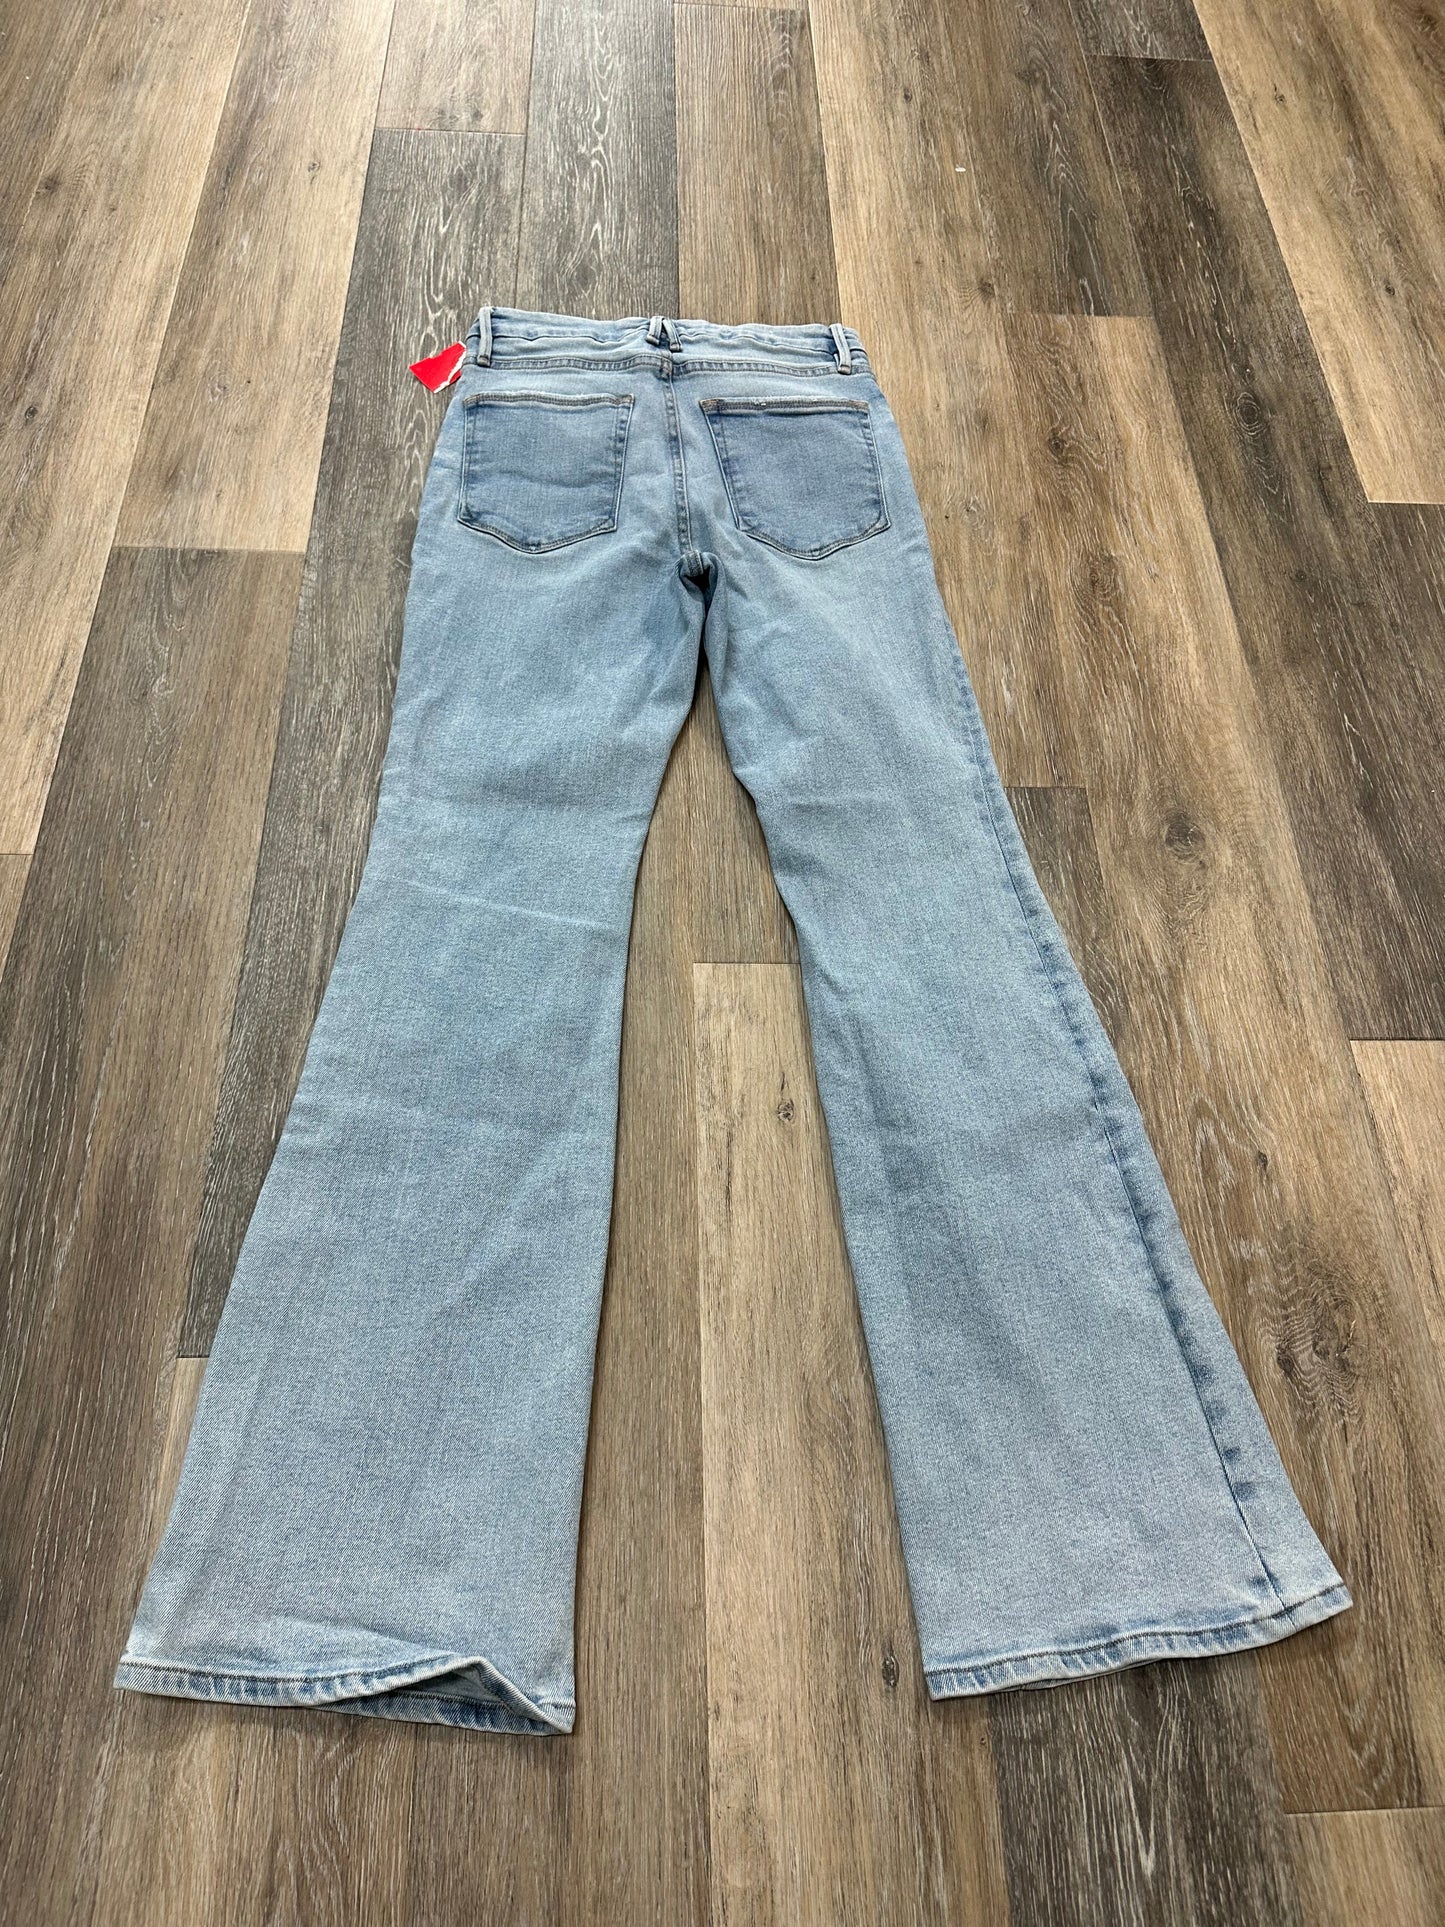 Jeans Boot Cut By Good American  Size: 8